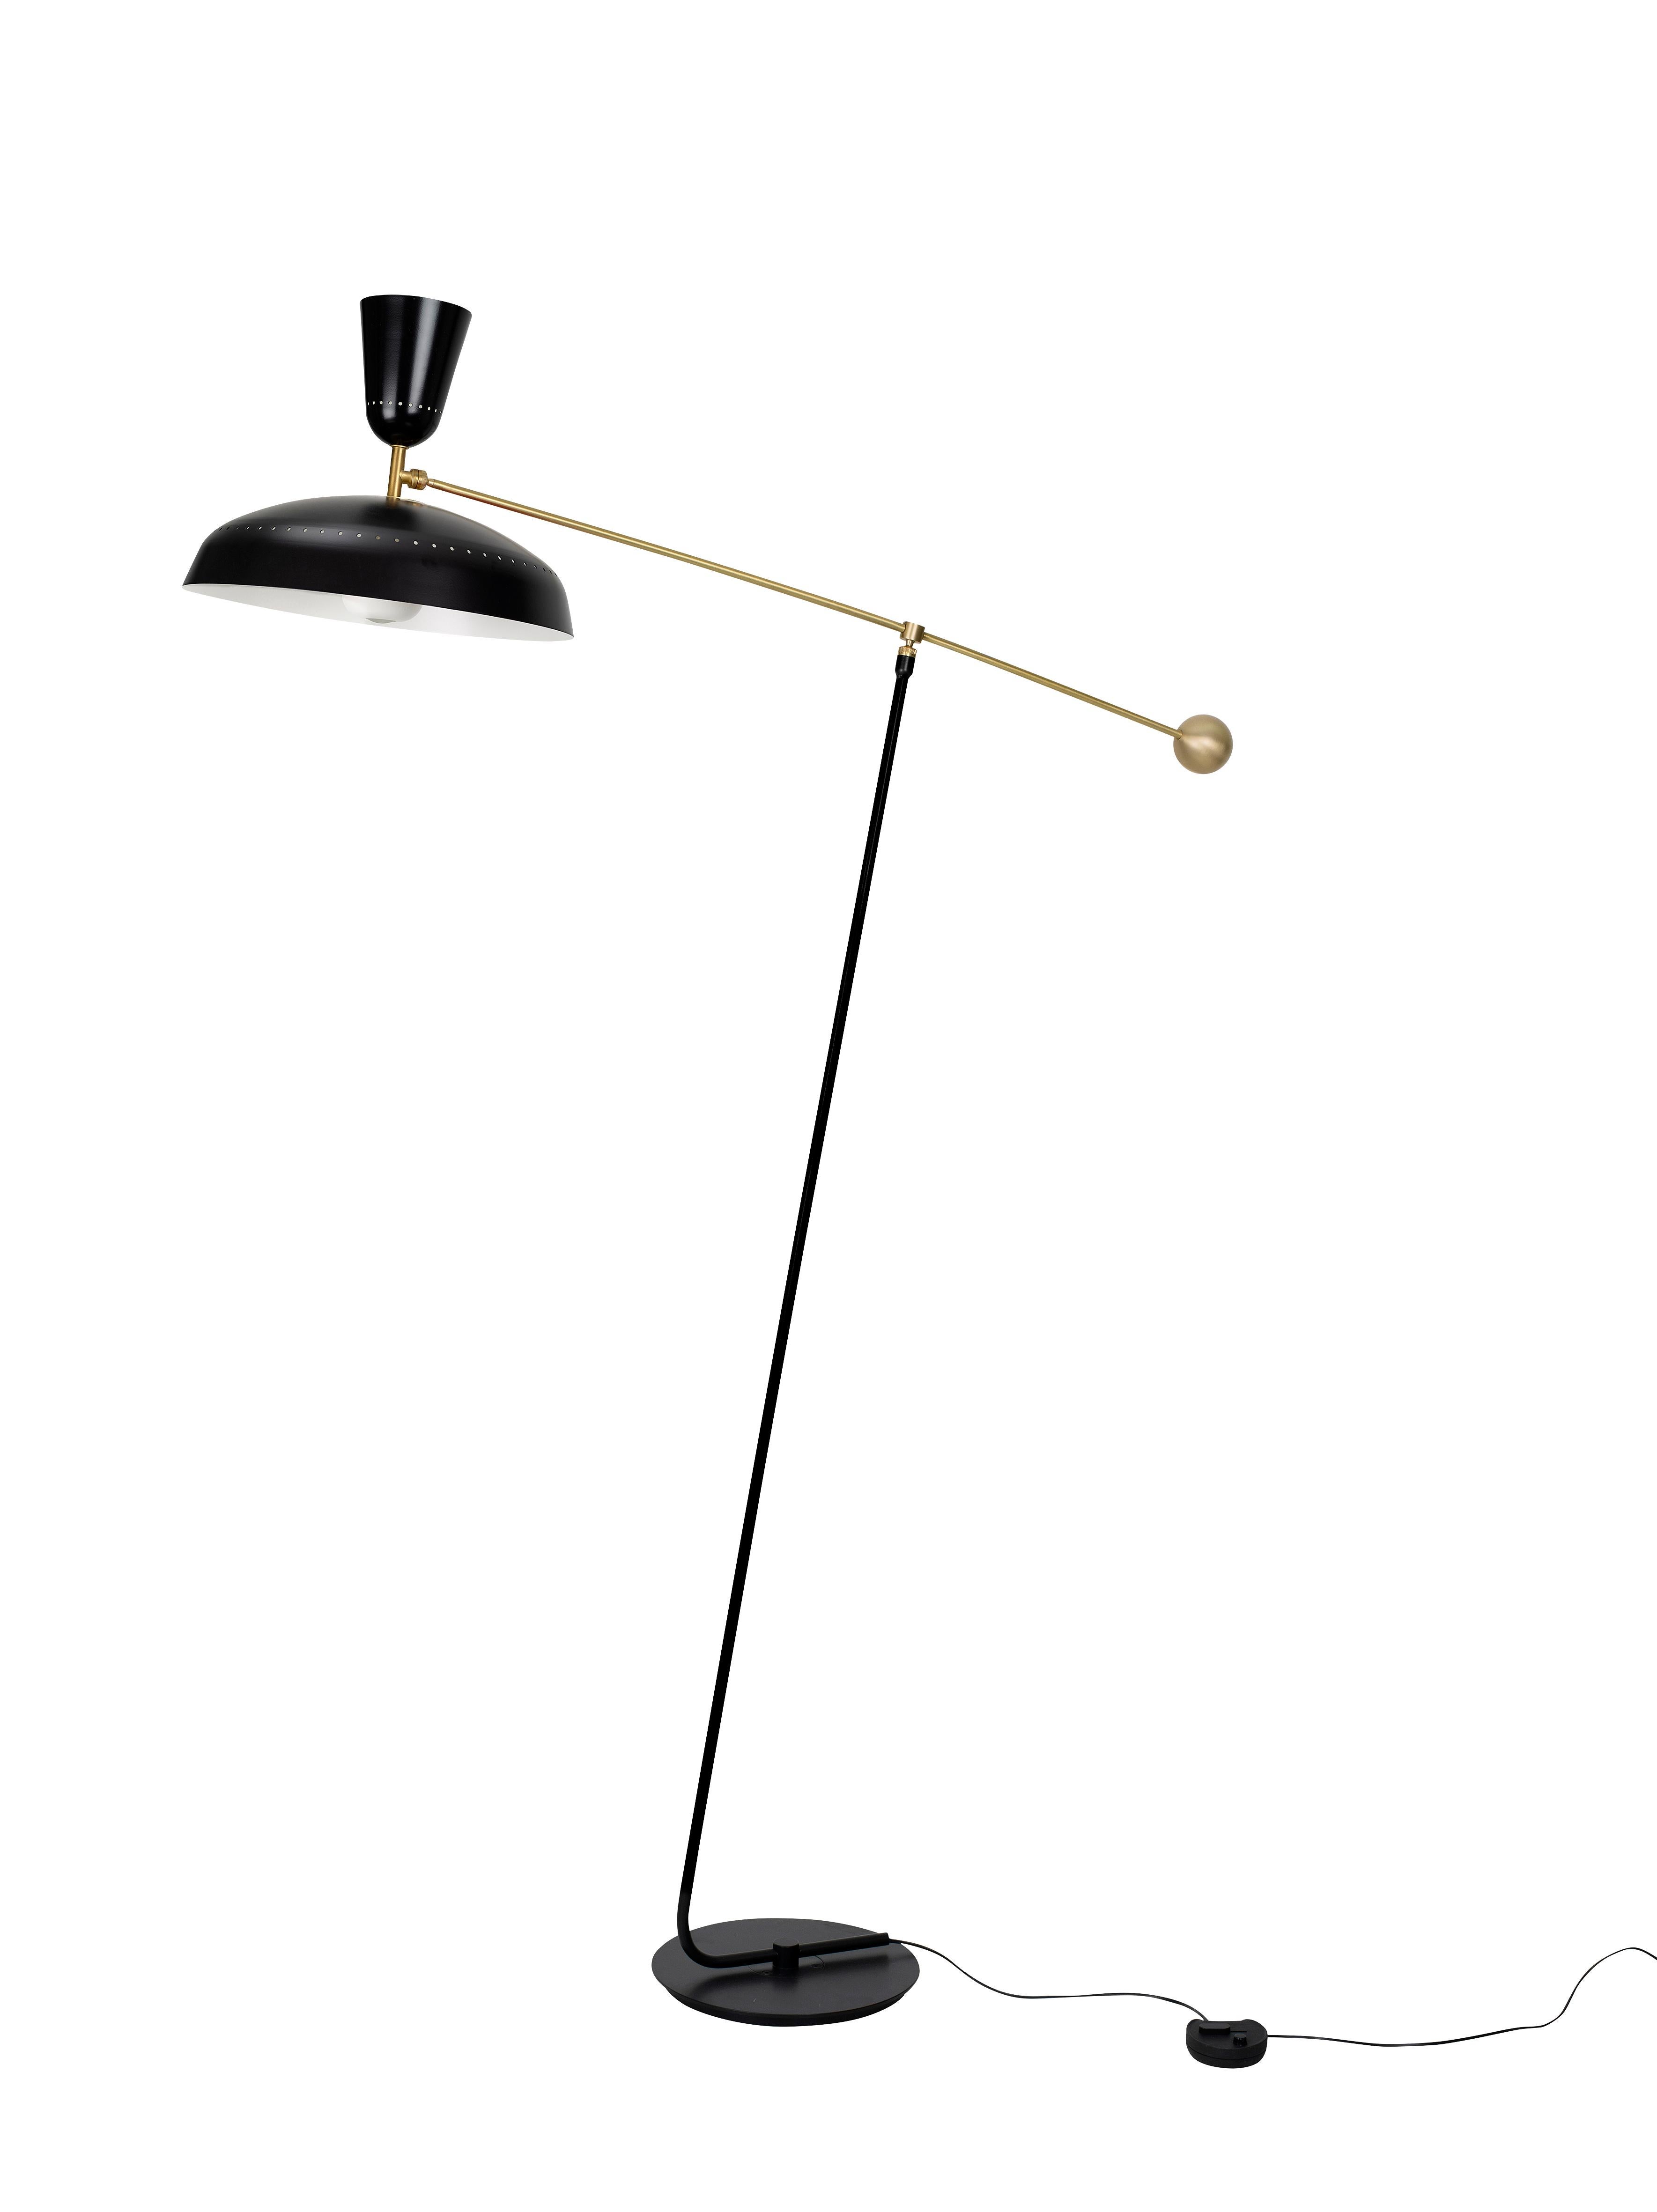 Large Pierre Guariche 'G1' Floor Lamp for Sammode Studio in Green For Sale 5